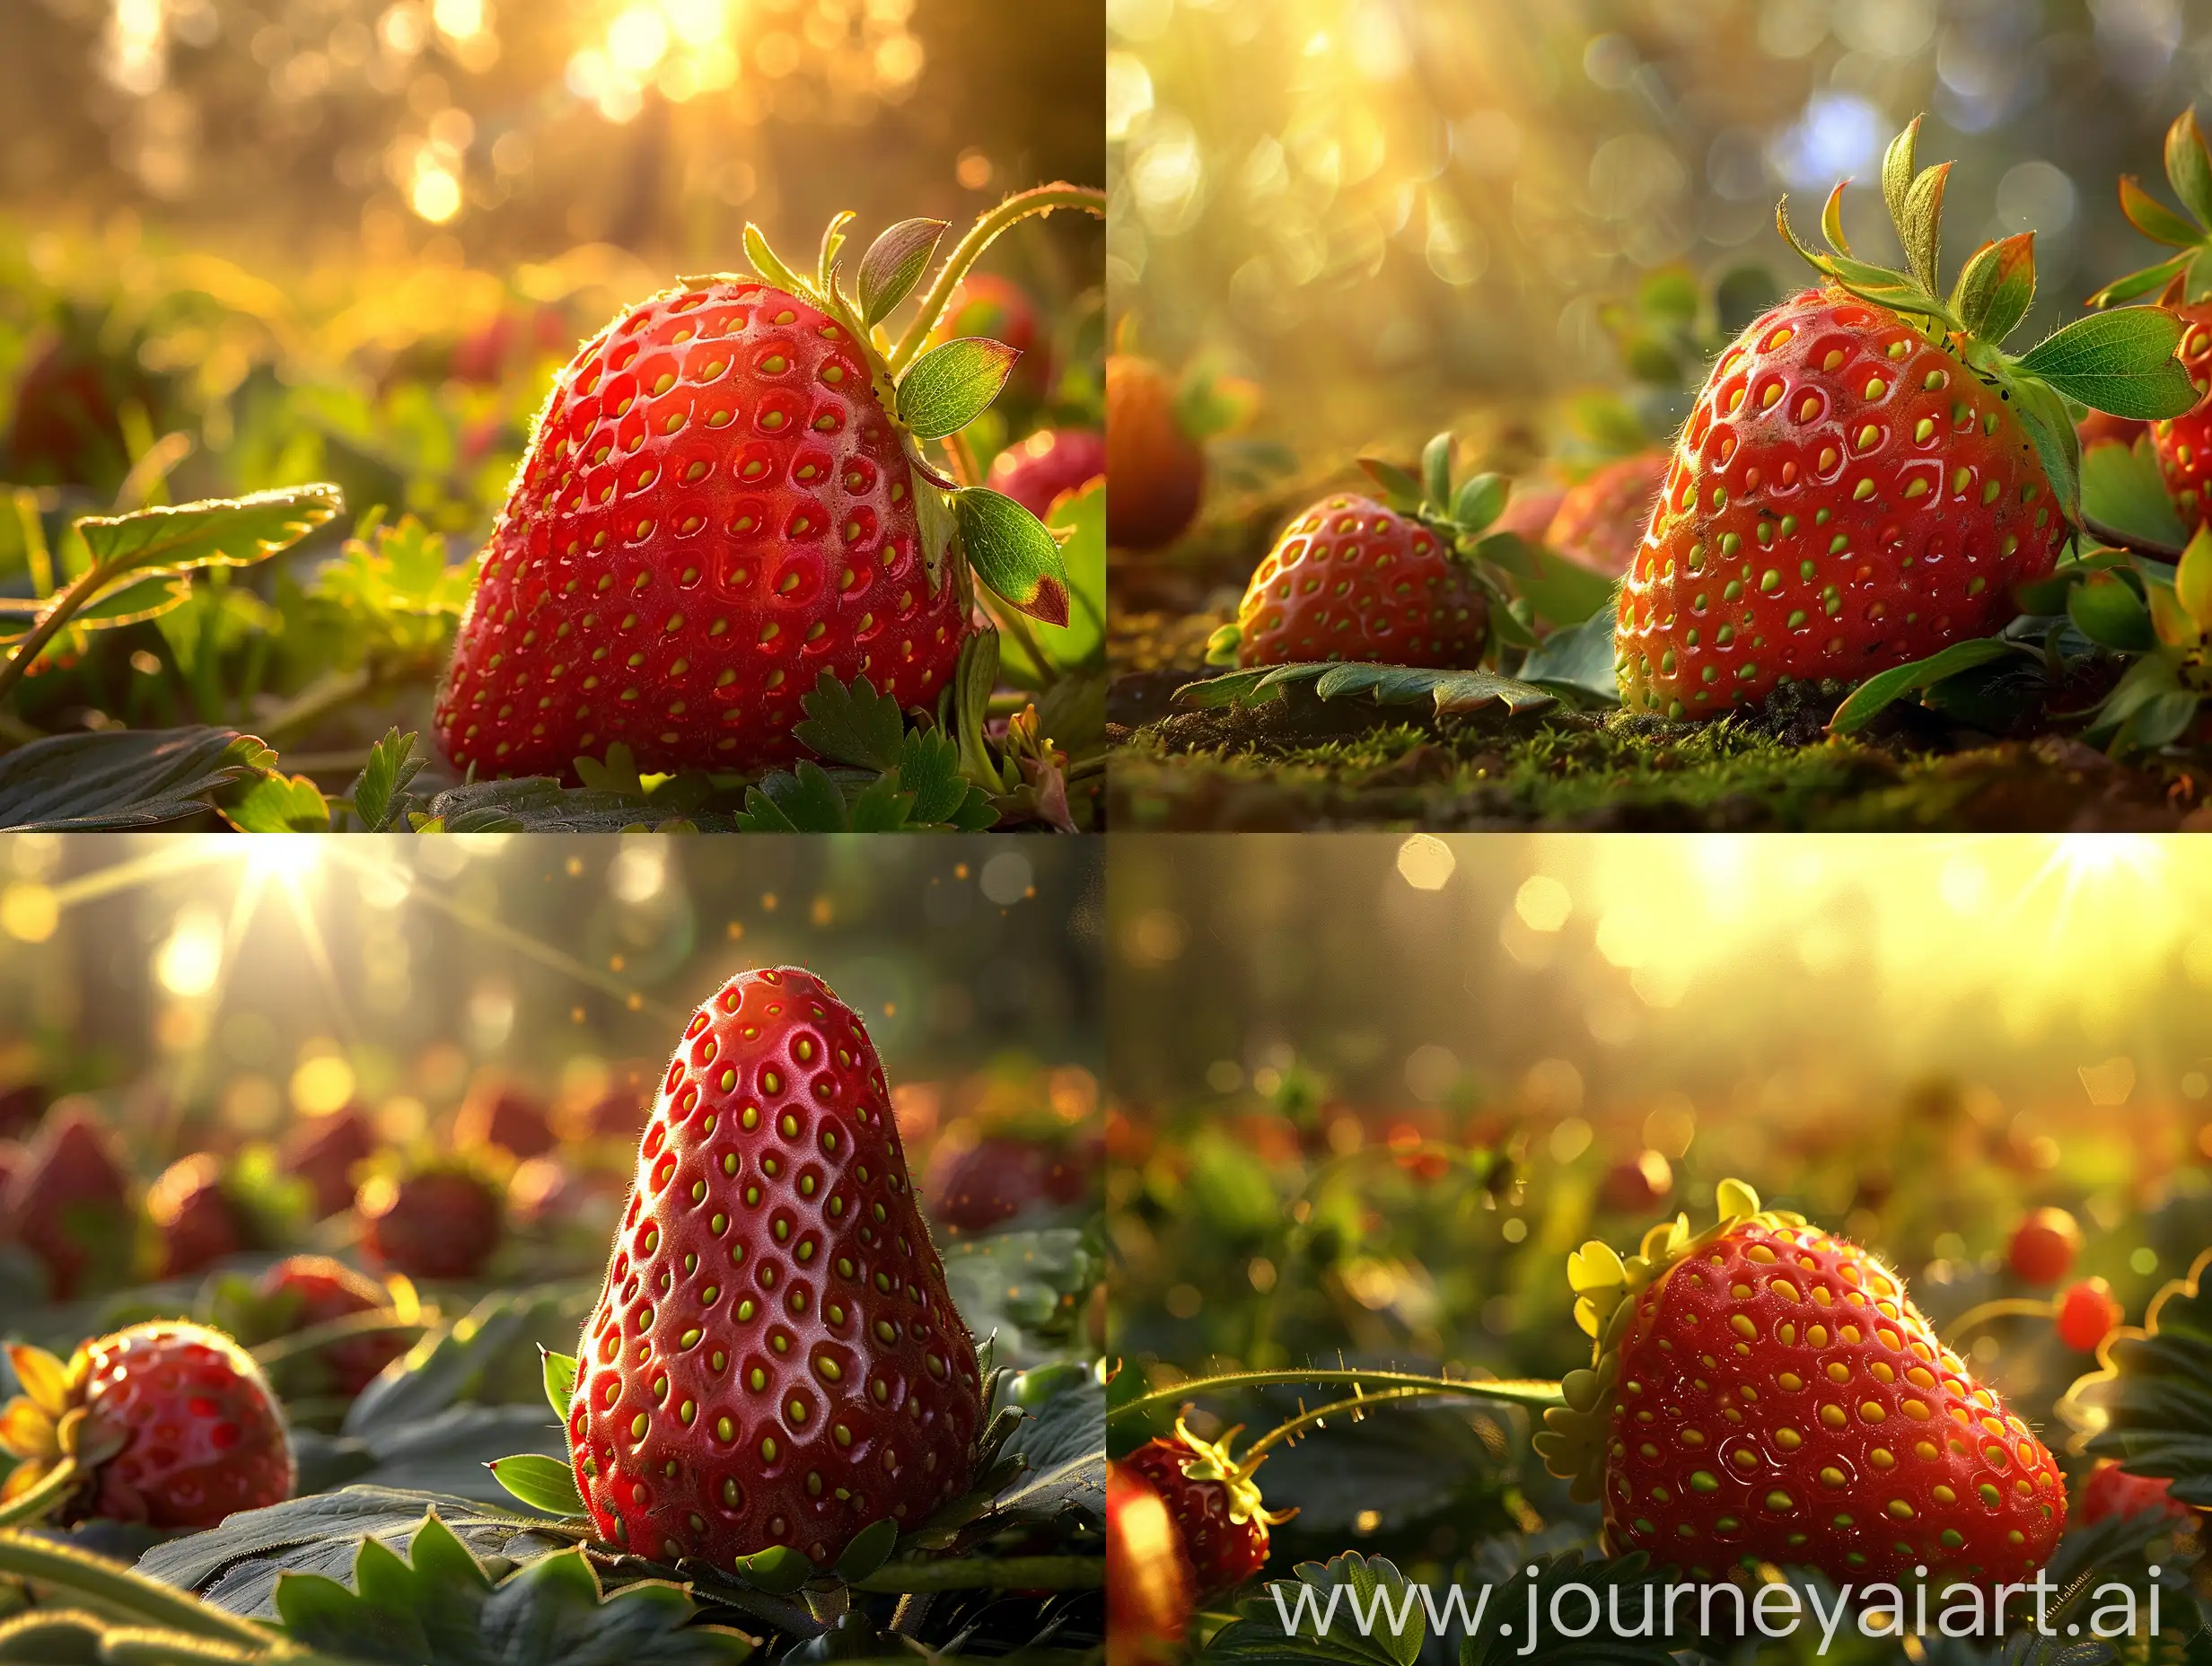 High detailed photo capturing a Strawberry, Eversweet. The sun, casting a warm, golden glow, bathes the scene in a serene ambiance, illuminating the intricate details of each element. The composition centers on a Strawberry, Eversweet. Specially bred for the southeastern US, ‘Eversweet’ yields continuous harvests of large, sweet strawberries throughout spring, summer and fall. Especially tasty, bright-red cone-shaped berries can be enjoyed fresh or frozen.  Well-adapted, disease-resista. The image evokes a sense of tranquility and natural beauty, inviting viewers to immerse themselves in the splendor of the landscape. --ar 16:9 